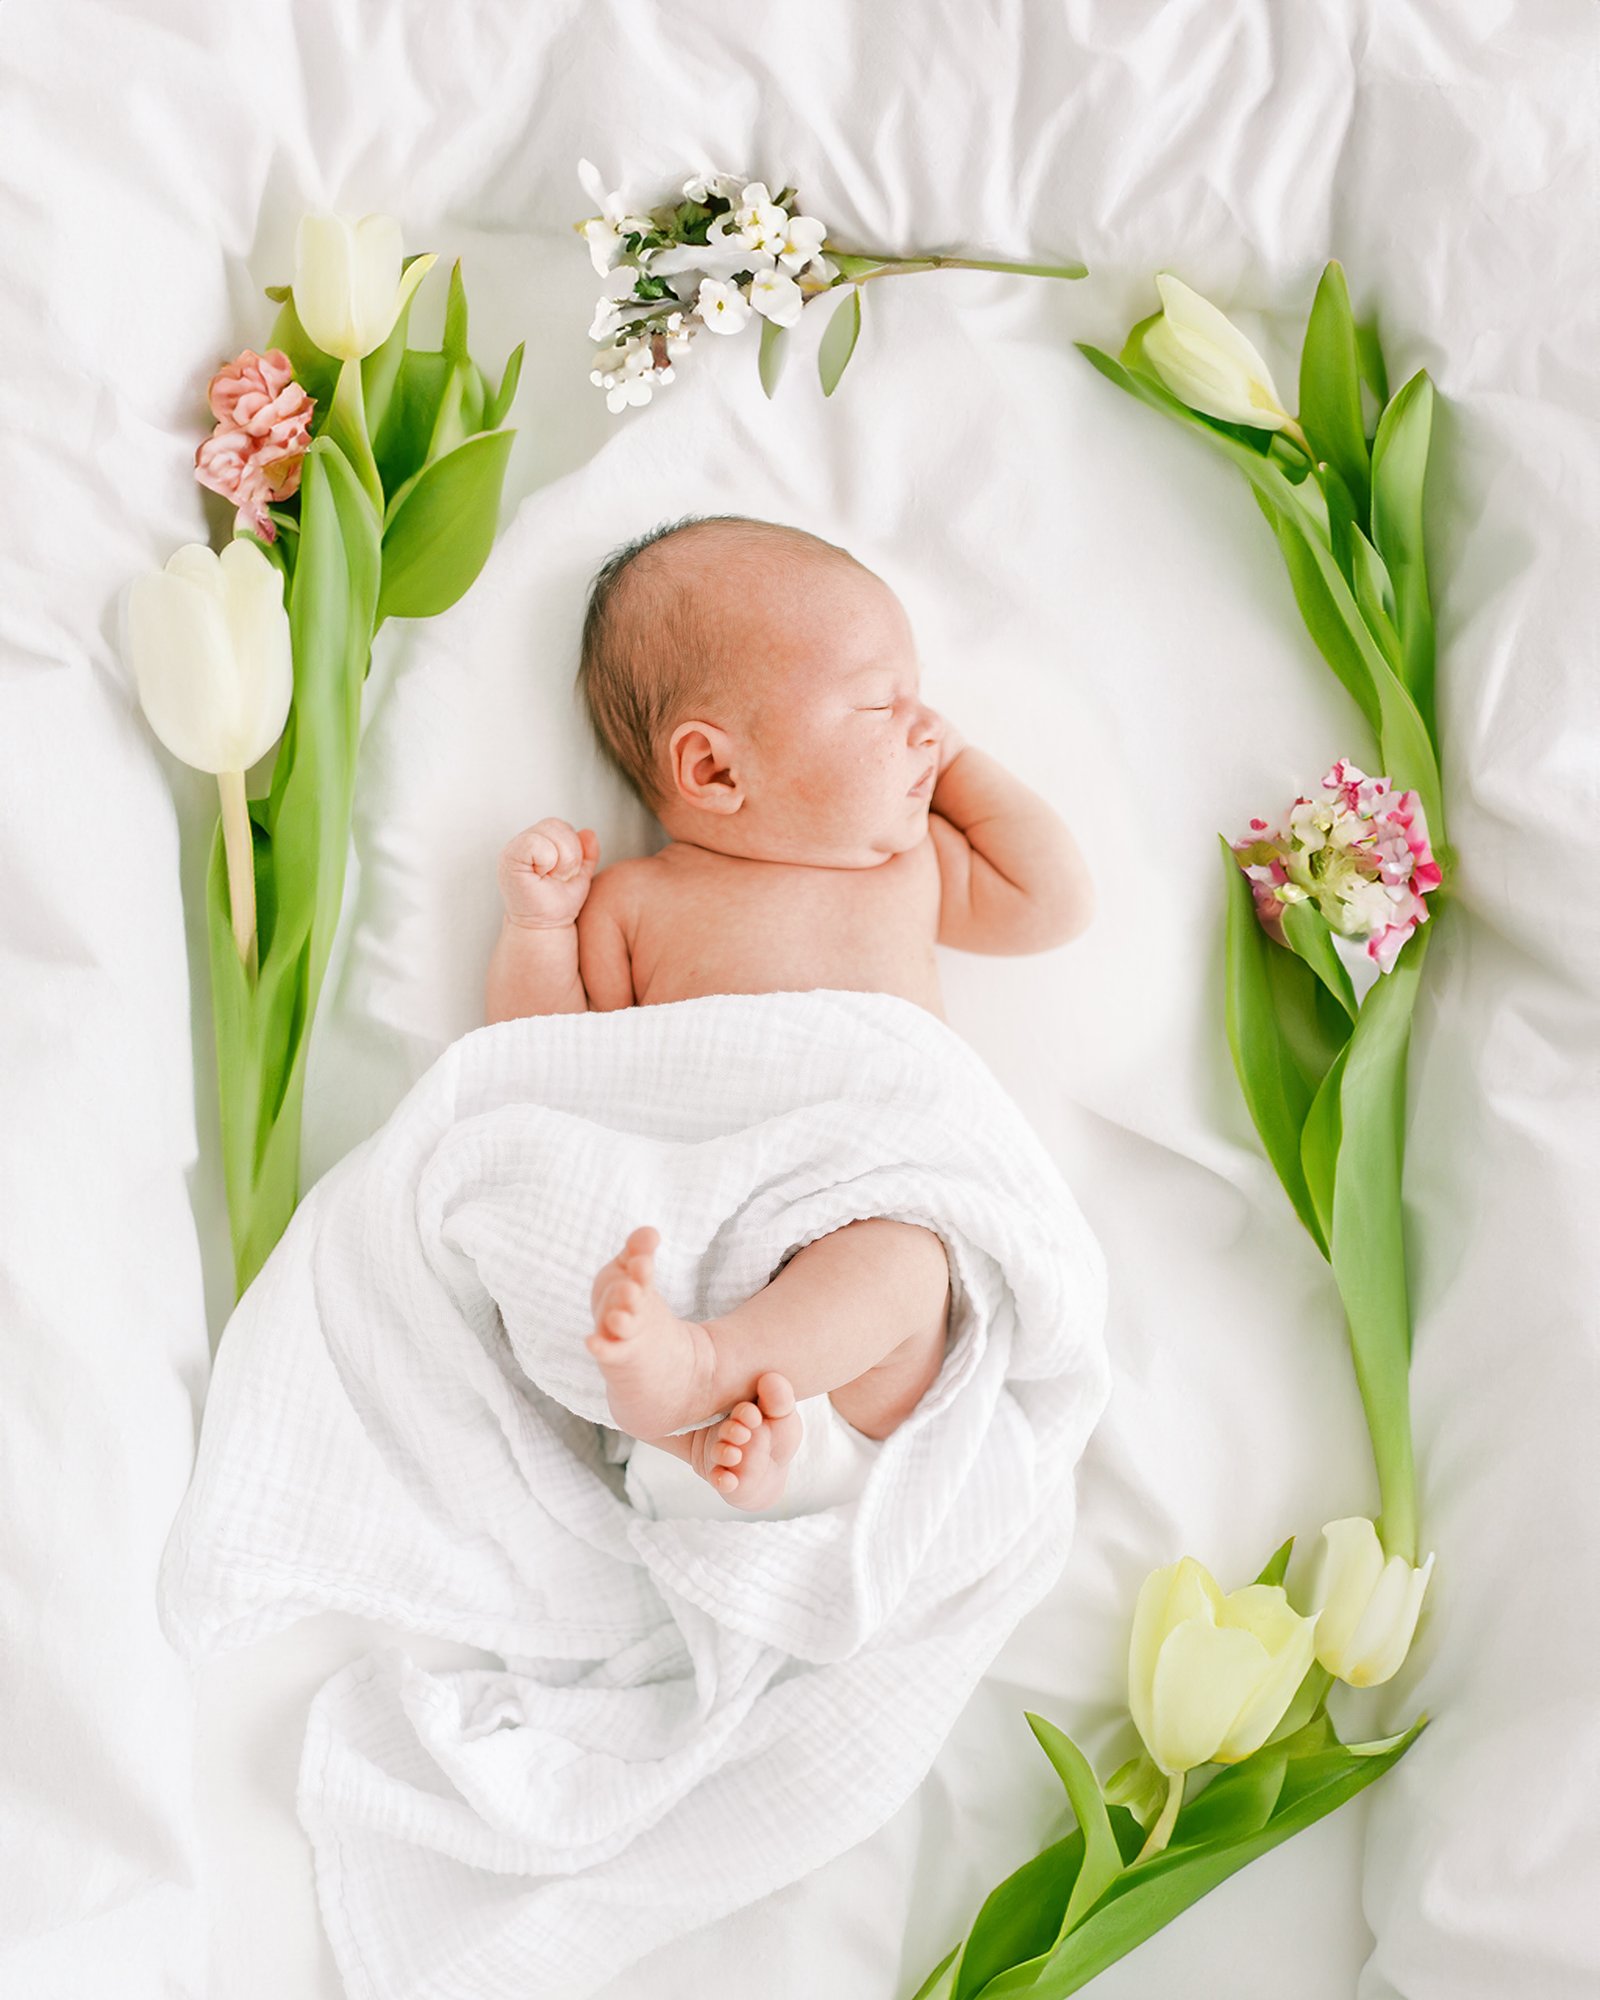 Newborn baby on a white bed surrounded by spring flowers